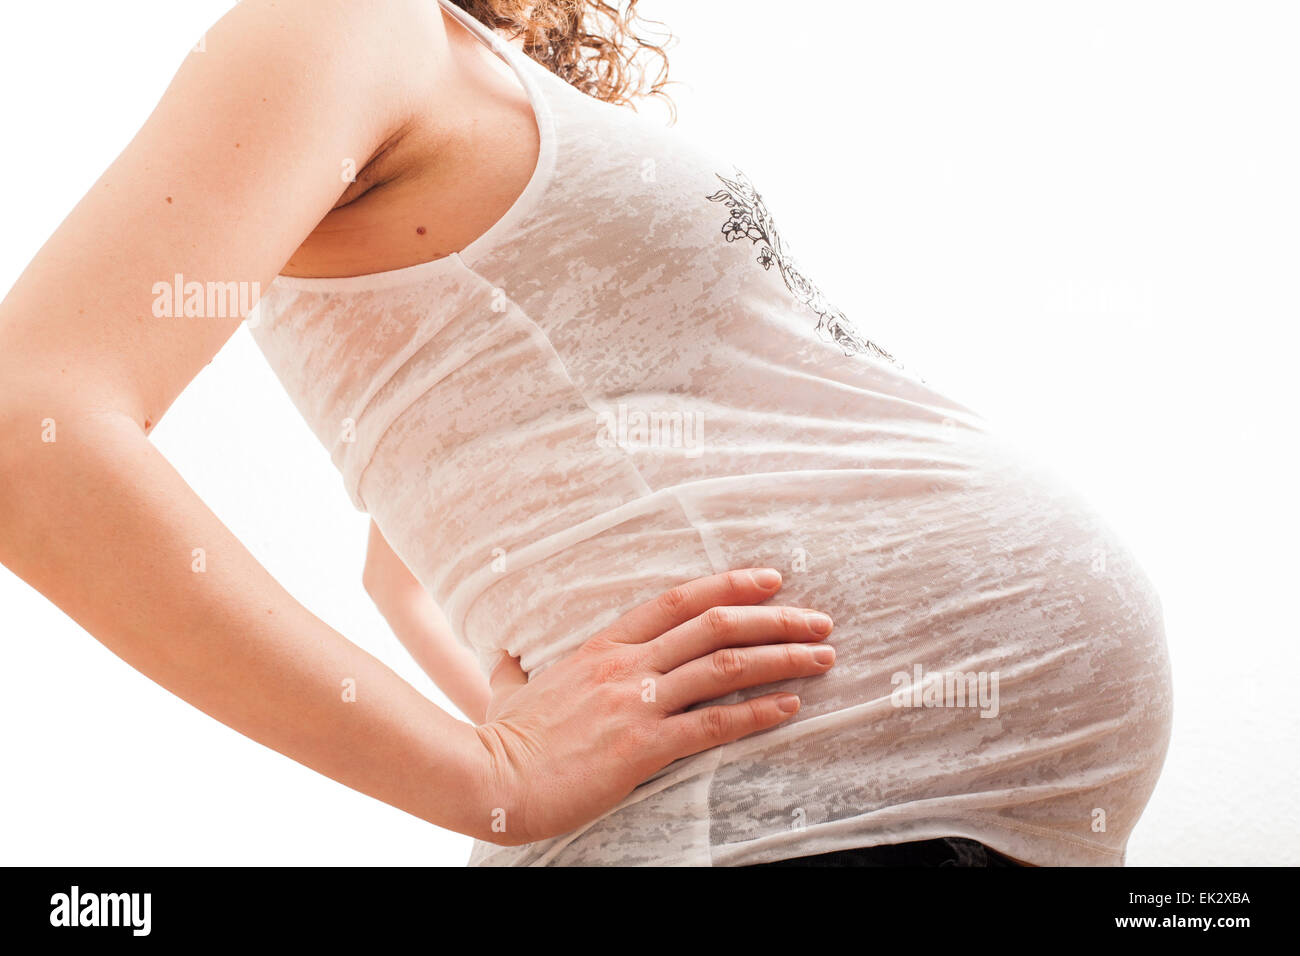 39 year old heavily pregnant woman in her late 30's. Stock Photo